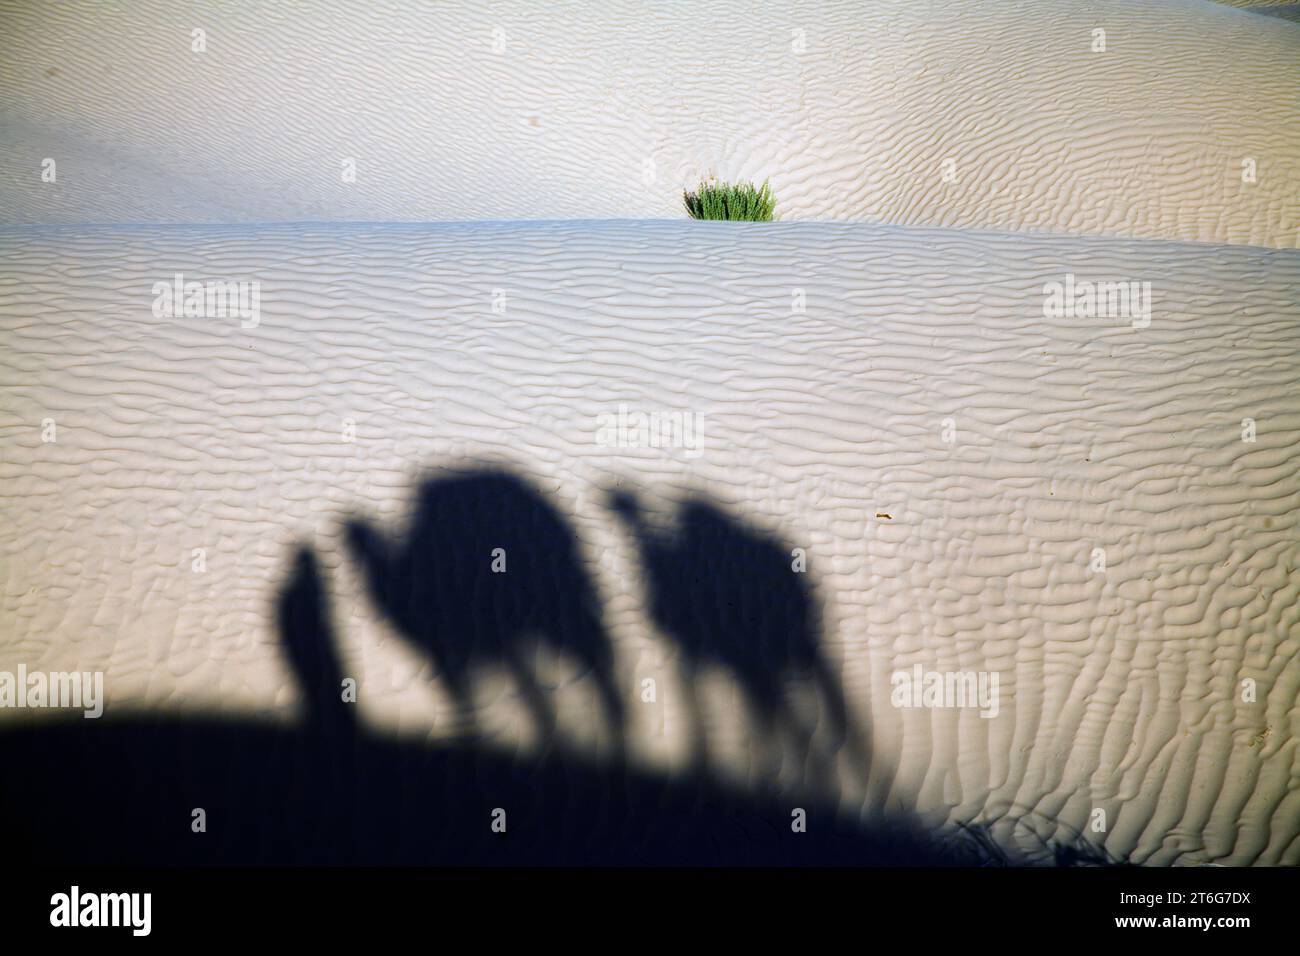 Shadow of a man and two camels (dromedaries) on a sand dune. Stock Photo